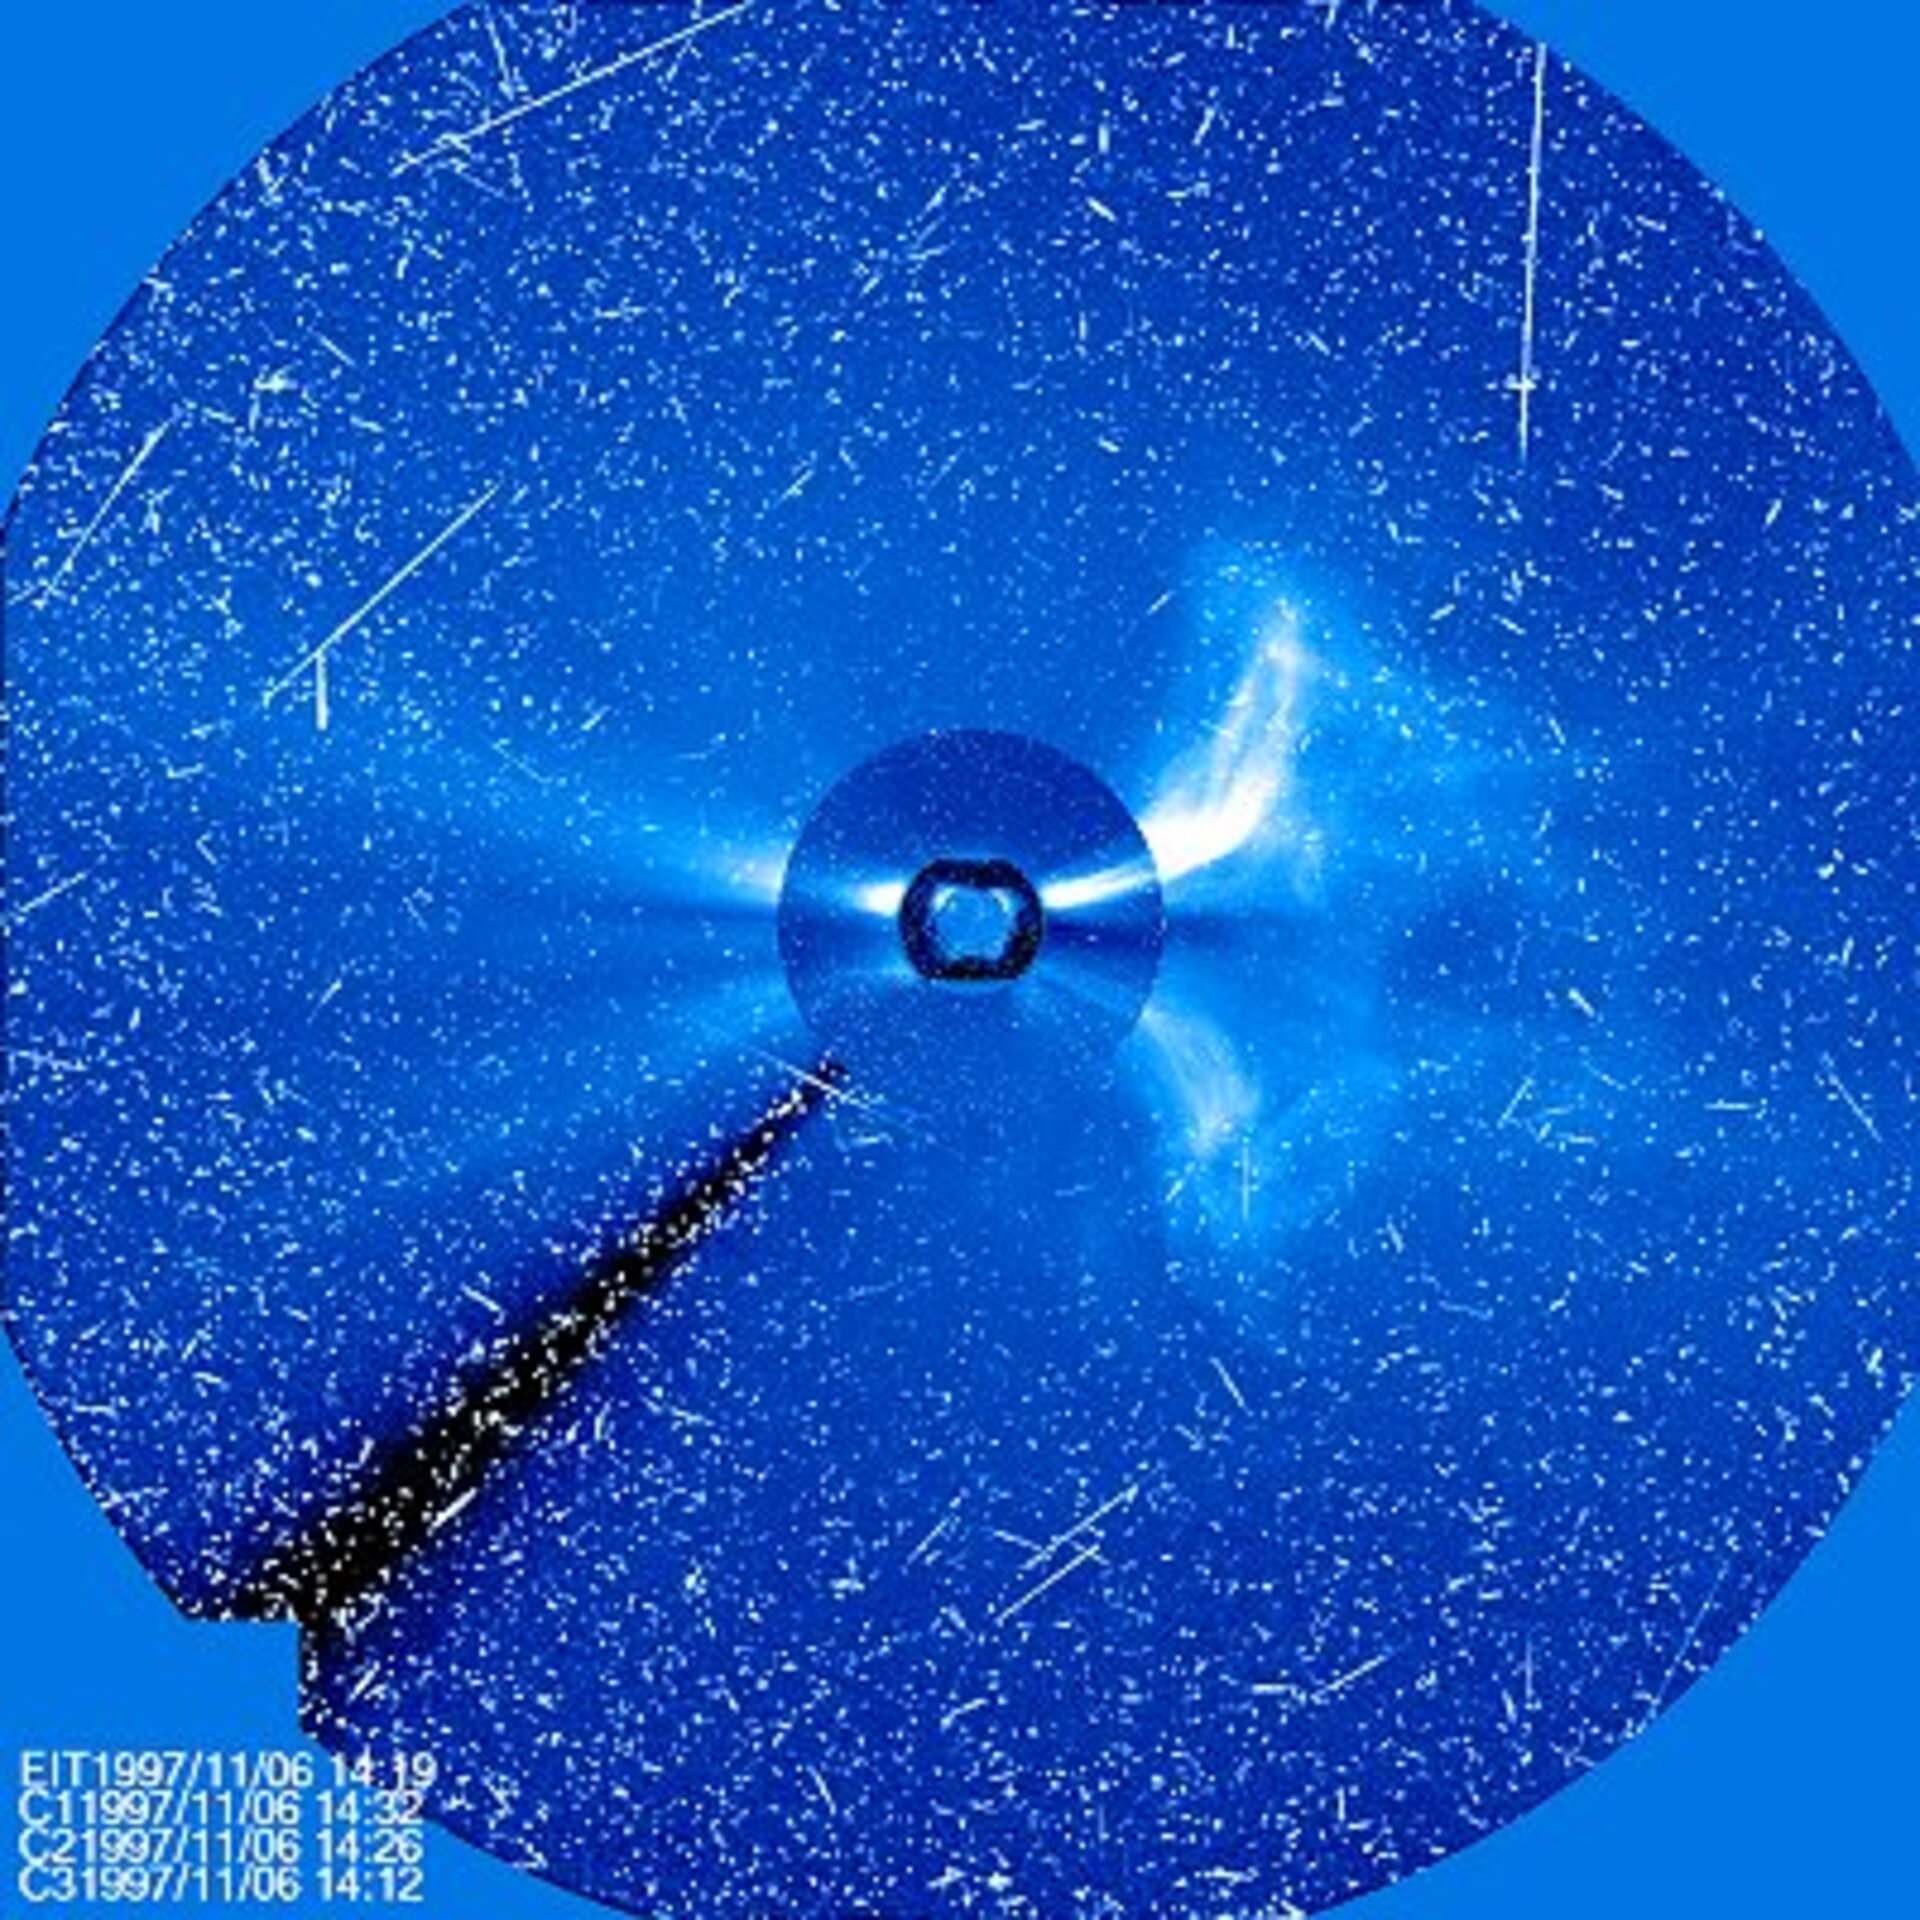 SOHO/LASCO coronagraph image showing contamination by energetic particles associated with solar activity